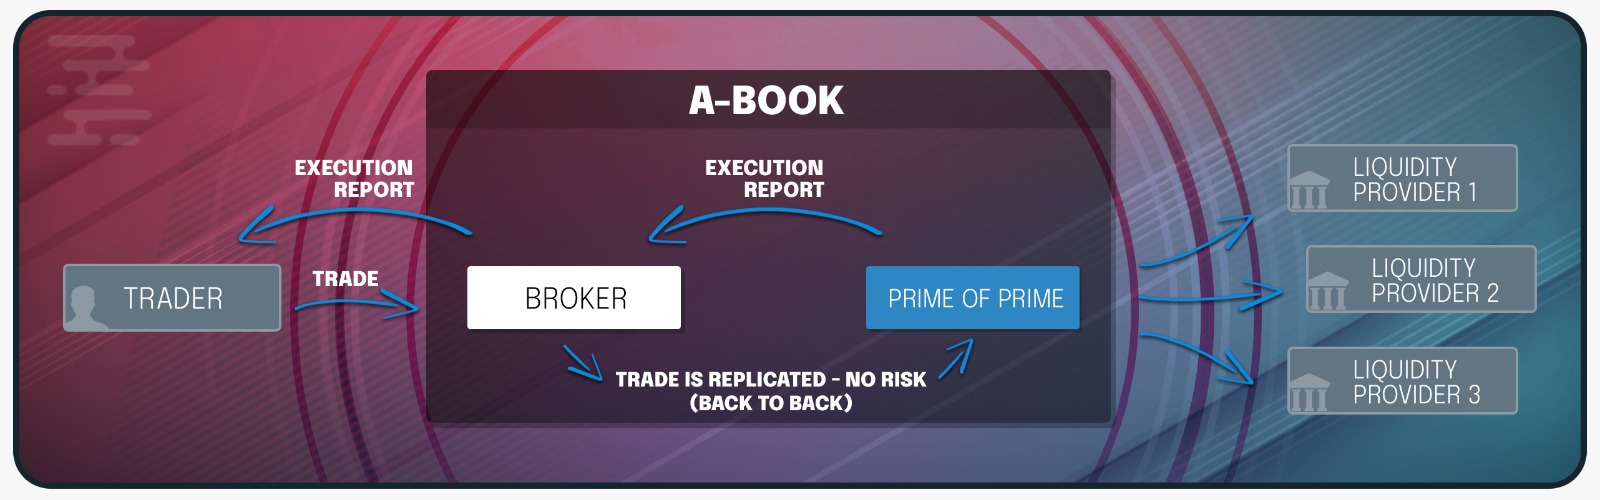 The Benefits and Risks of Running a A-Book.jpeg